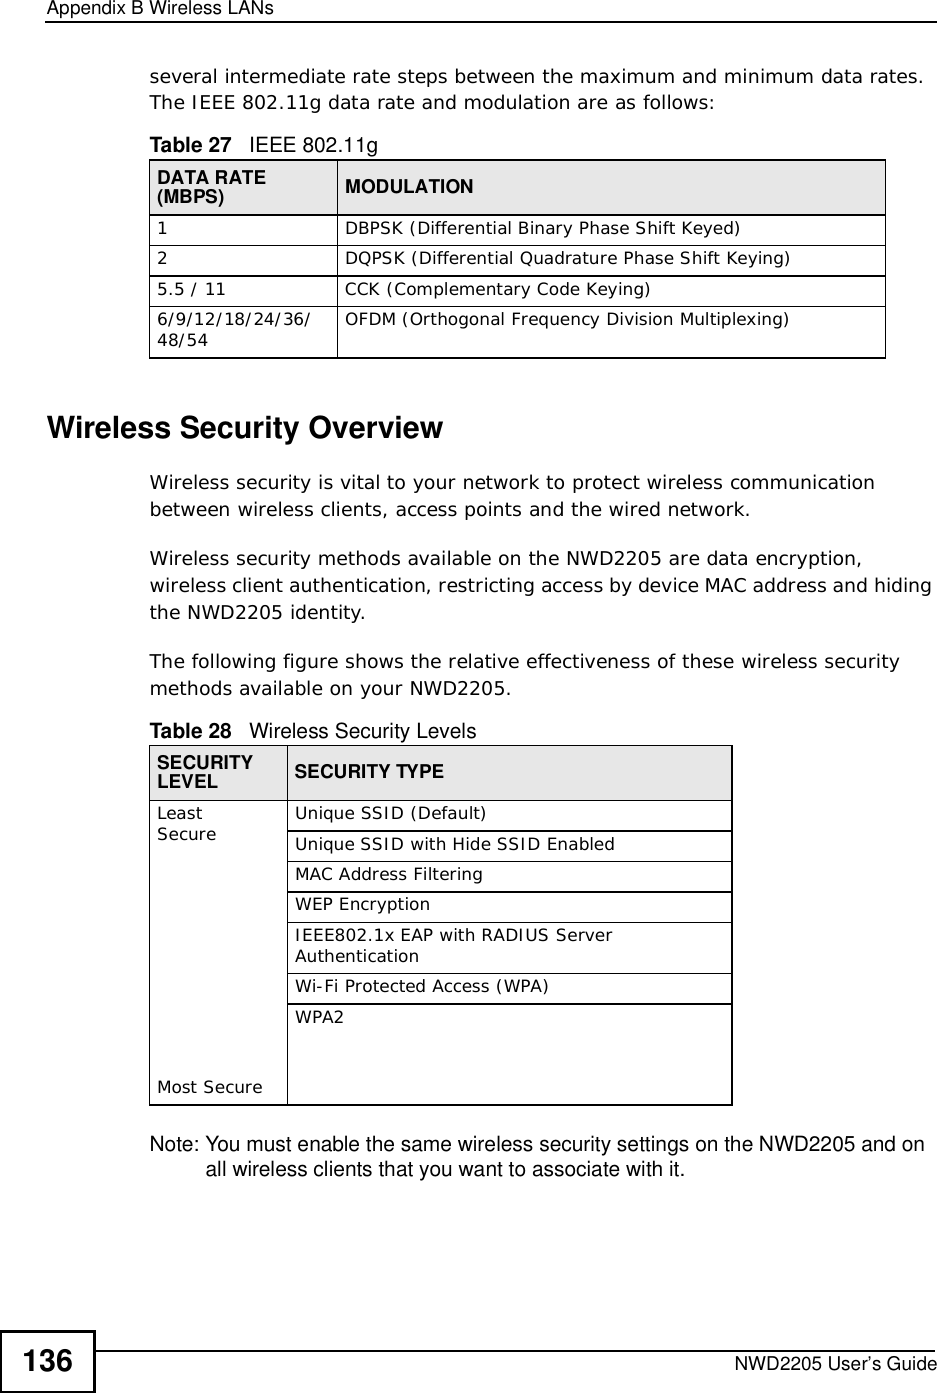 Appendix BWireless LANsNWD2205 User’s Guide136several intermediate rate steps between the maximum and minimum data rates. The IEEE 802.11g data rate and modulation are as follows:Wireless Security OverviewWireless security is vital to your network to protect wireless communication between wireless clients, access points and the wired network.Wireless security methods available on the NWD2205 are data encryption, wireless client authentication, restricting access by device MAC address and hiding the NWD2205 identity.The following figure shows the relative effectiveness of these wireless security methods available on your NWD2205.Note: You must enable the same wireless security settings on the NWD2205 and on all wireless clients that you want to associate with it. Table 27   IEEE 802.11gDATA RATE (MBPS) MODULATION1DBPSK (Differential Binary Phase Shift Keyed)2DQPSK (Differential Quadrature Phase Shift Keying)5.5 / 11CCK (Complementary Code Keying) 6/9/12/18/24/36/48/54 OFDM (Orthogonal Frequency Division Multiplexing) Table 28   Wireless Security LevelsSECURITYLEVEL SECURITY TYPELeast       SecureMost SecureUnique SSID (Default)Unique SSID with Hide SSID EnabledMAC Address FilteringWEP EncryptionIEEE802.1x EAP with RADIUS Server AuthenticationWi-Fi Protected Access (WPA)WPA2